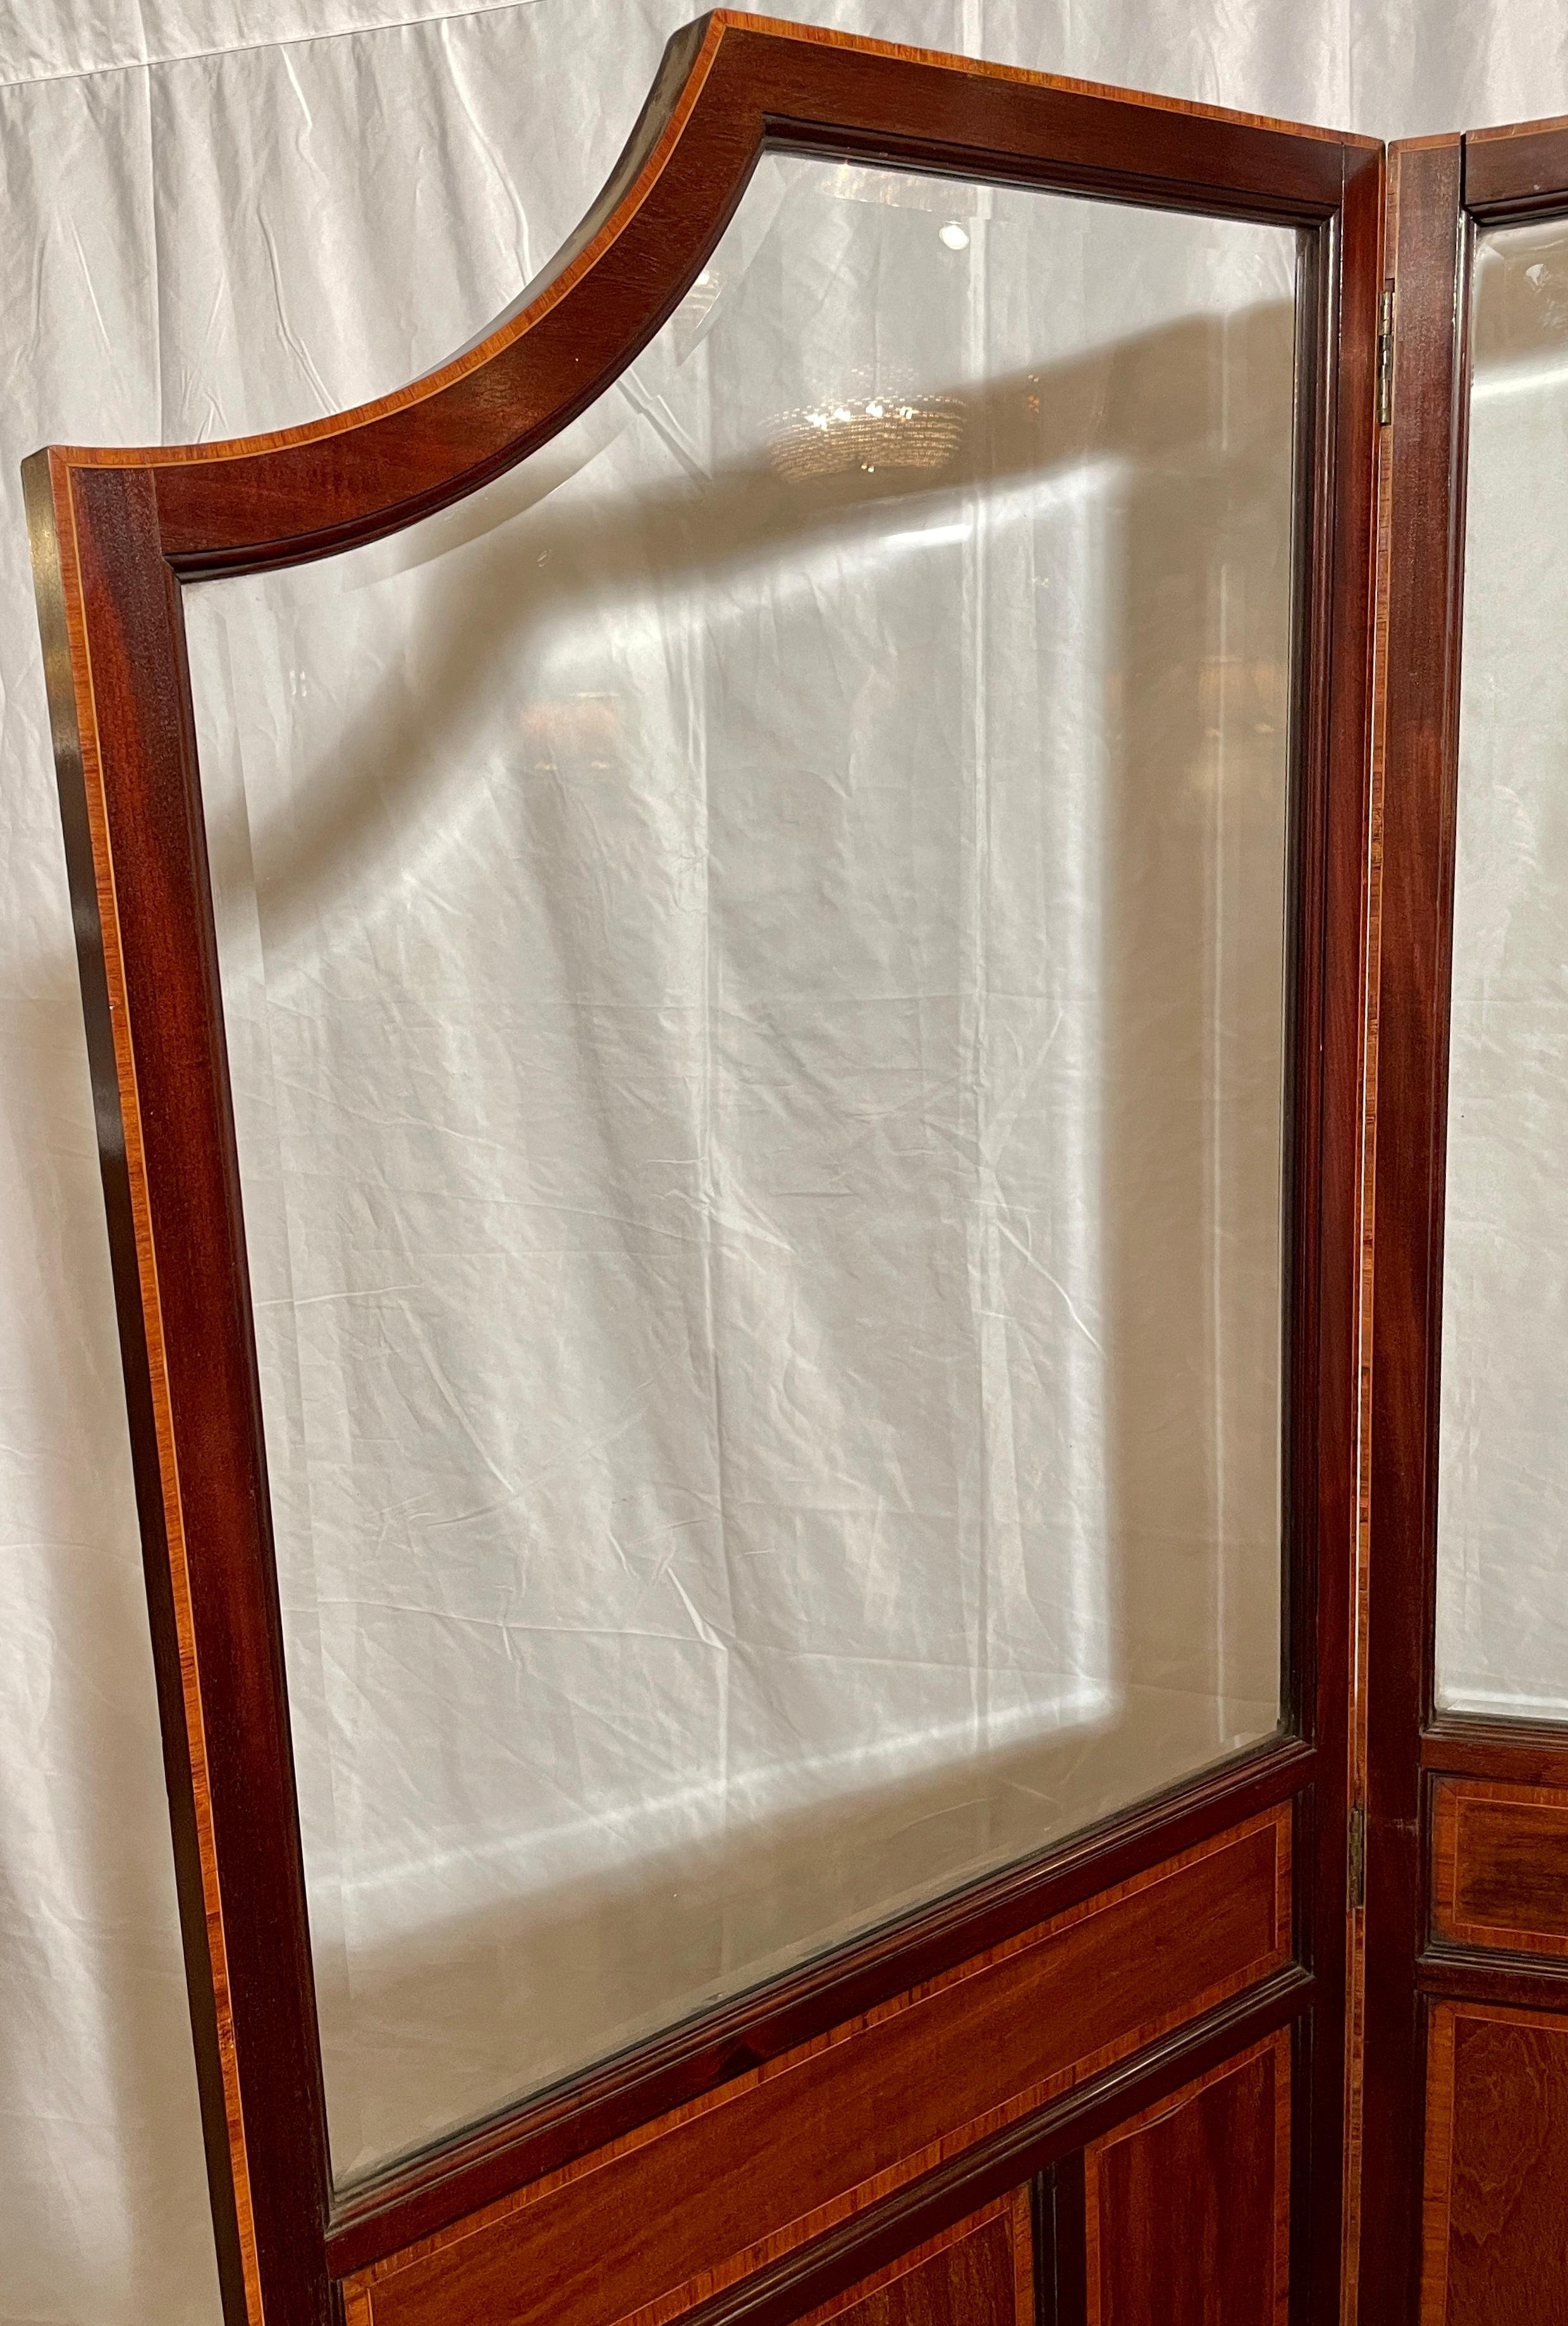 Antique English Inlaid Mahogany & Beveled Glass 3 Panel Floor Screen, Circa 1900 In Good Condition For Sale In New Orleans, LA